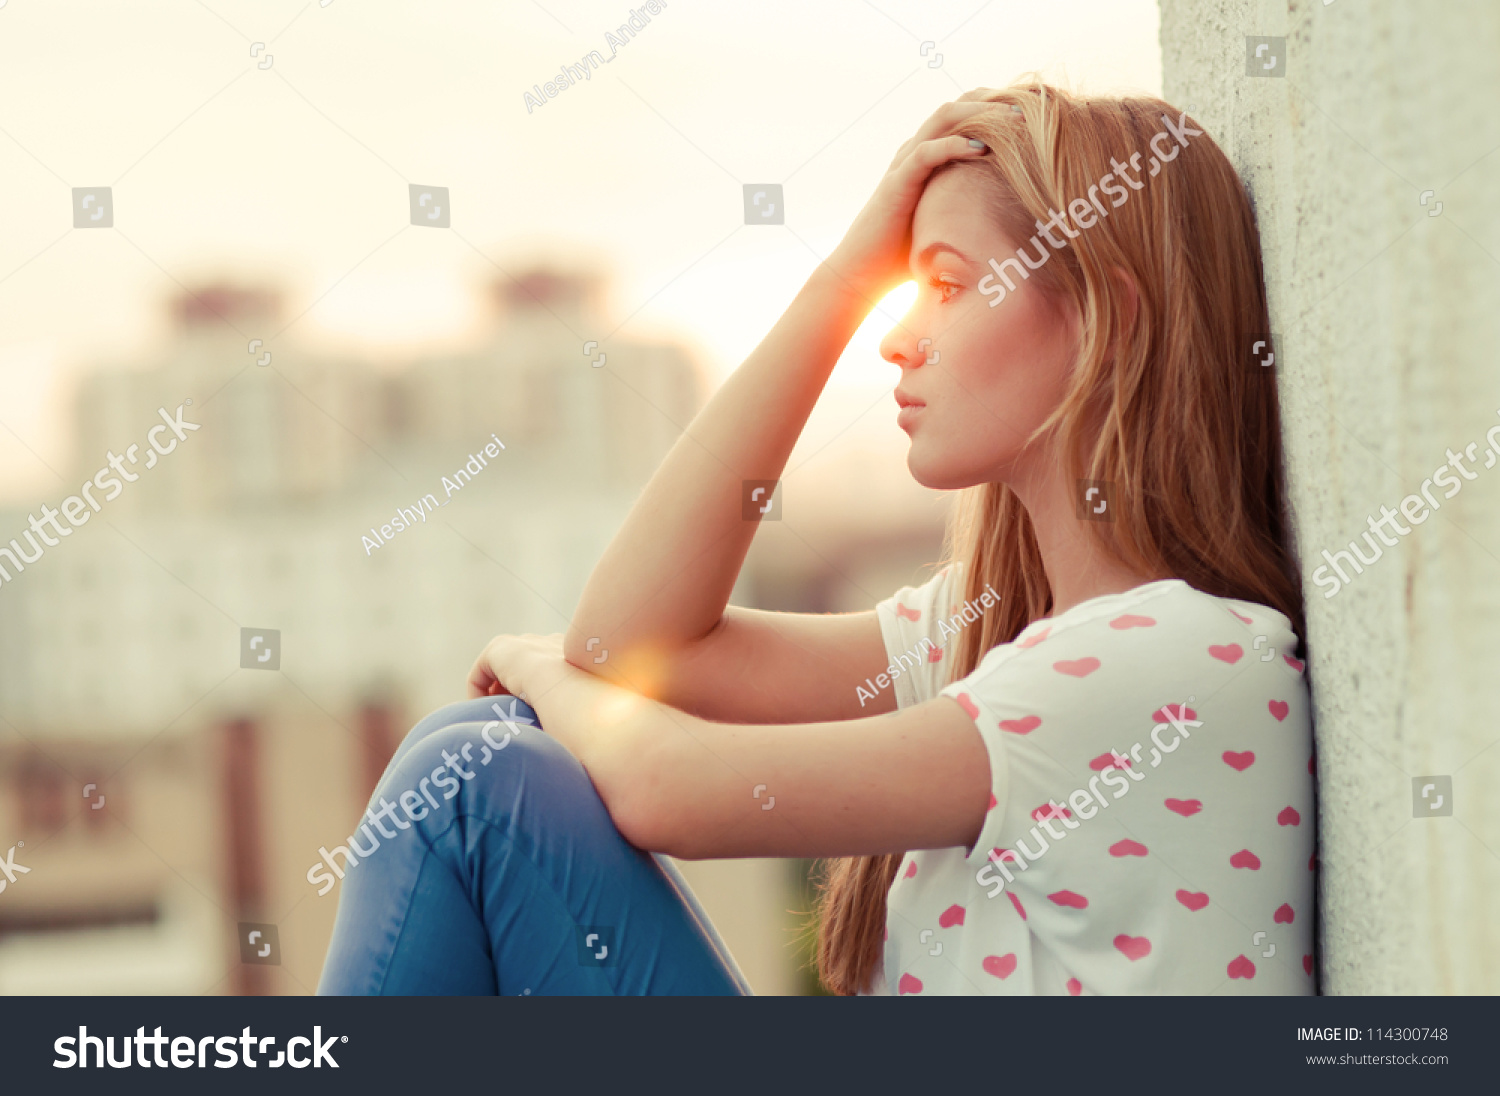 Beautiful Lonely Girl Sitting On Roof Stock Photo 114300748 - Shutterstock-3075